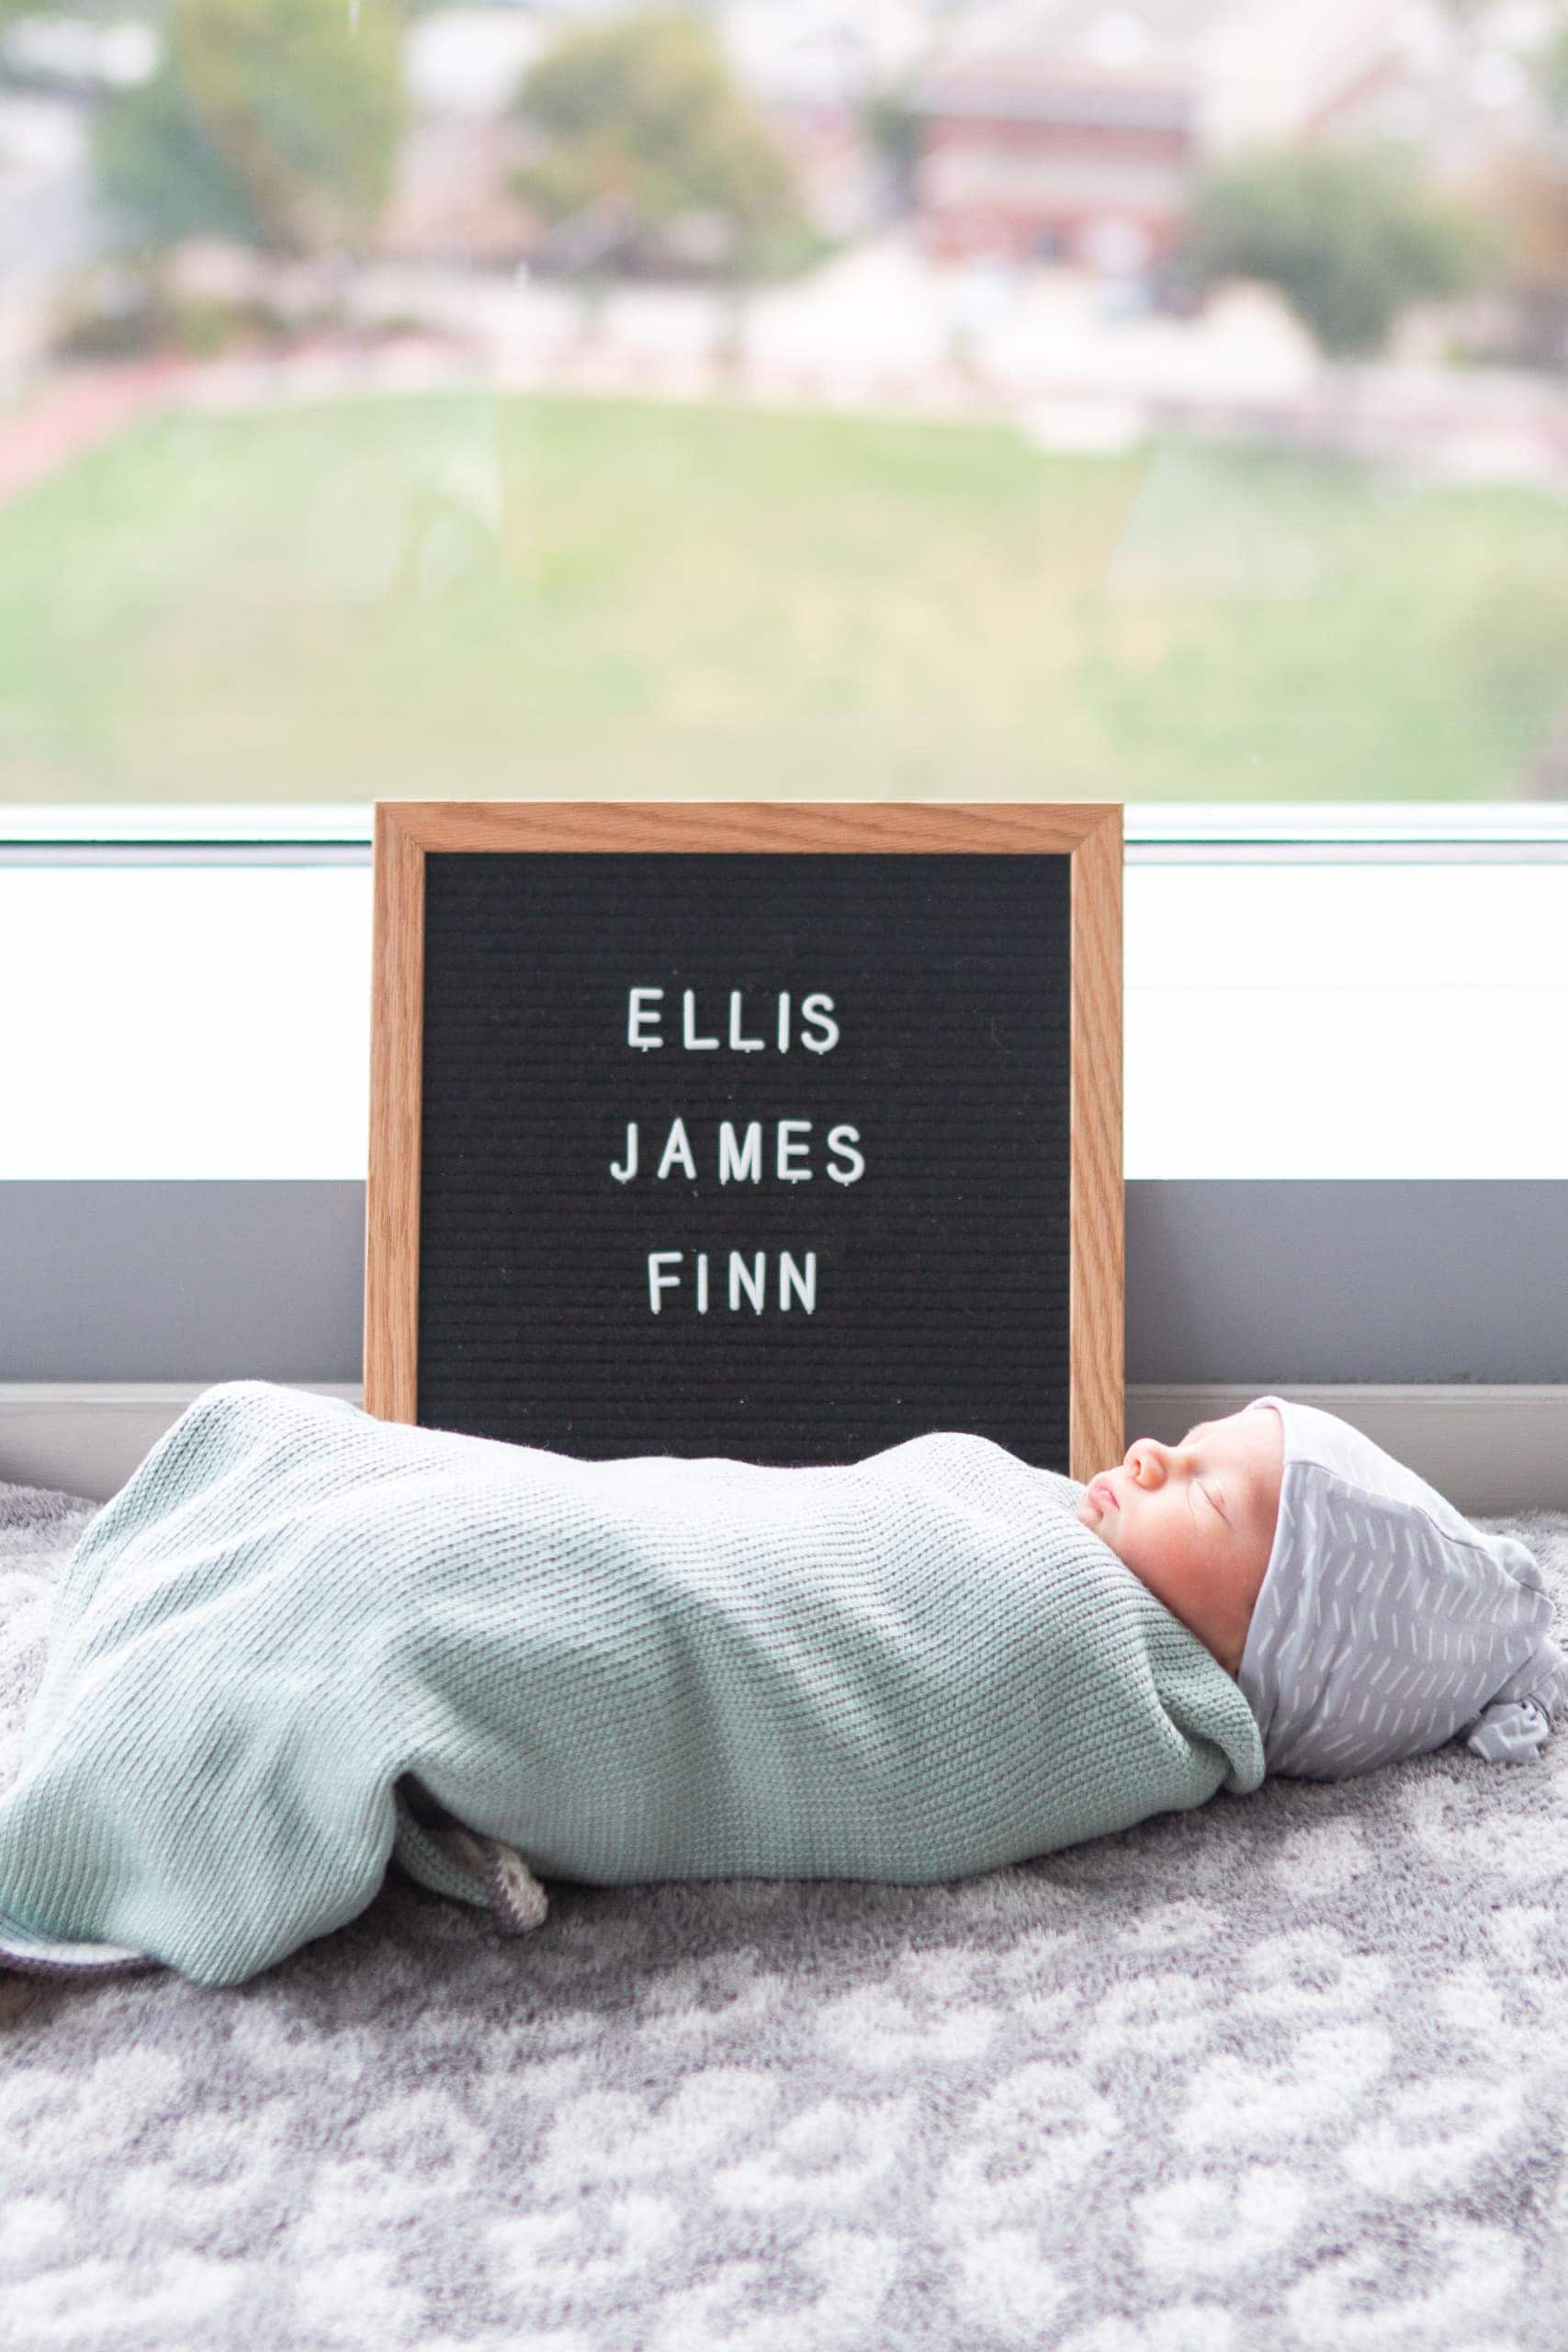 Introducing our son Ellis